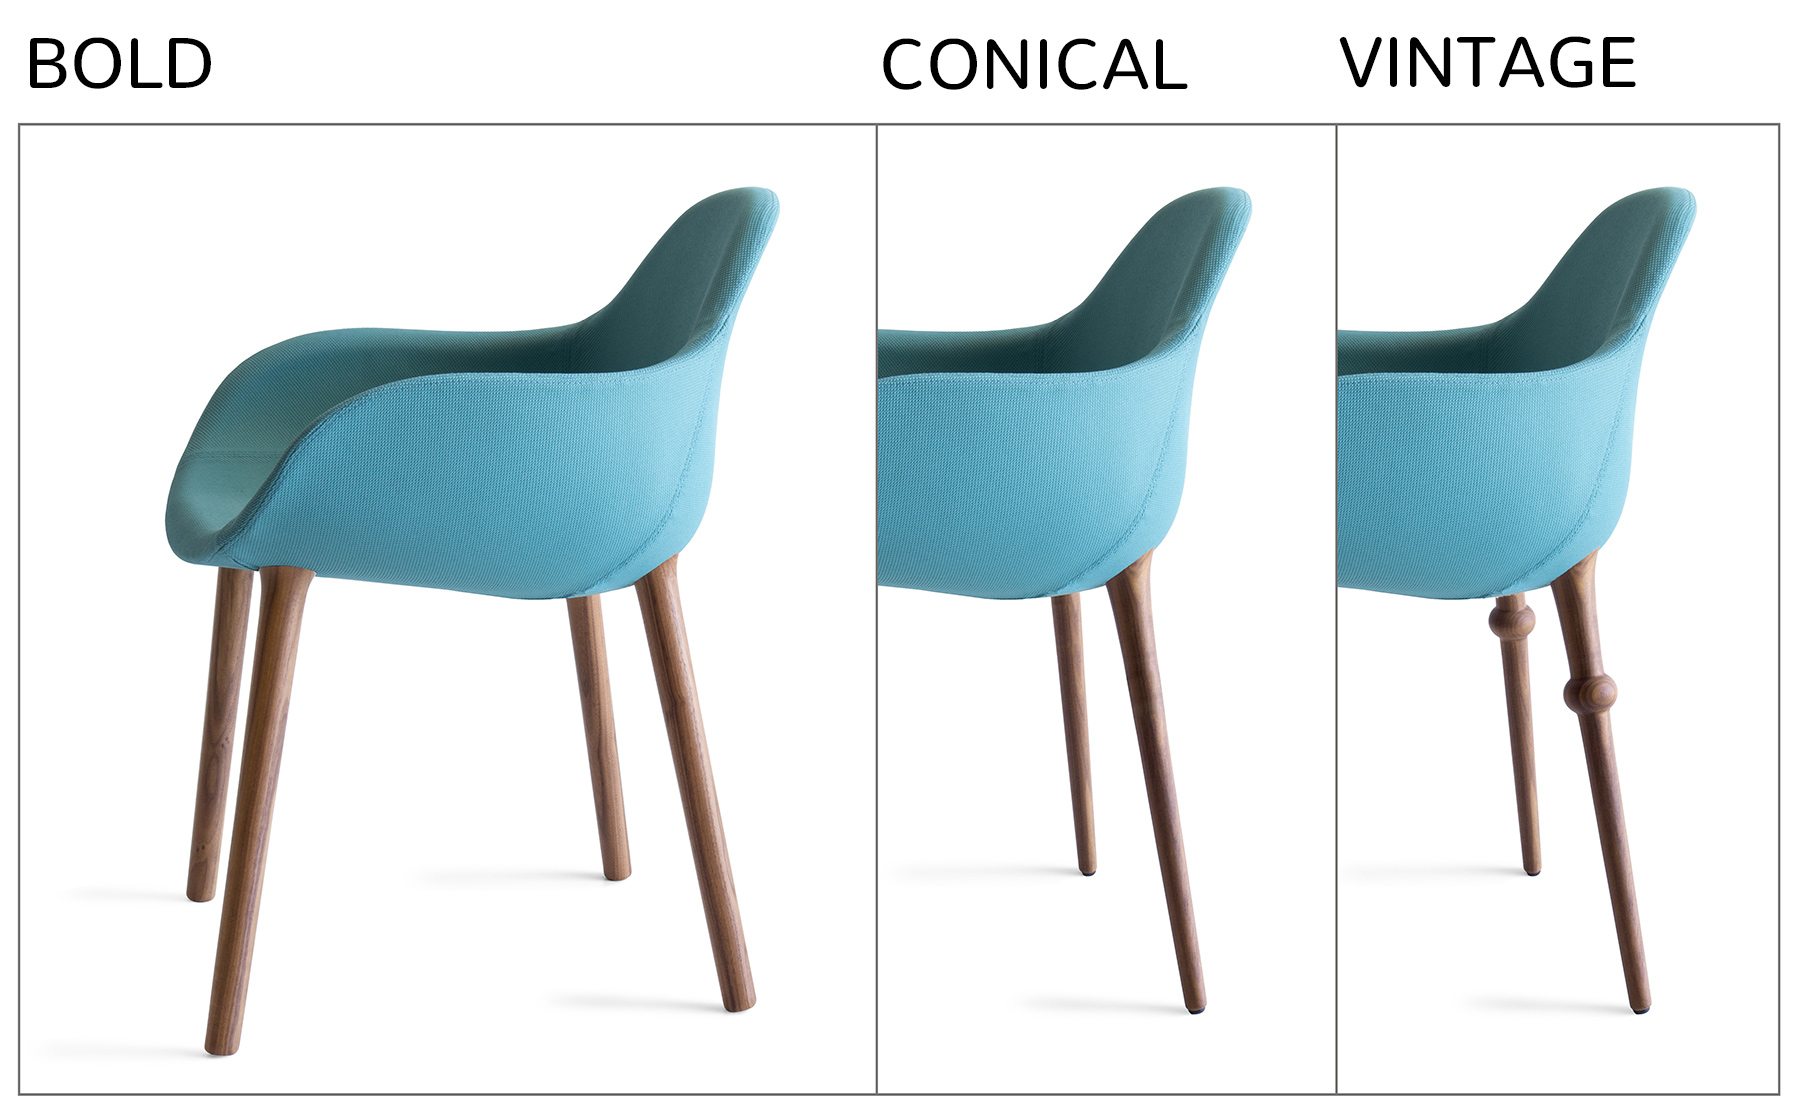 epoque chairs collection-bold-conical-vintage legs